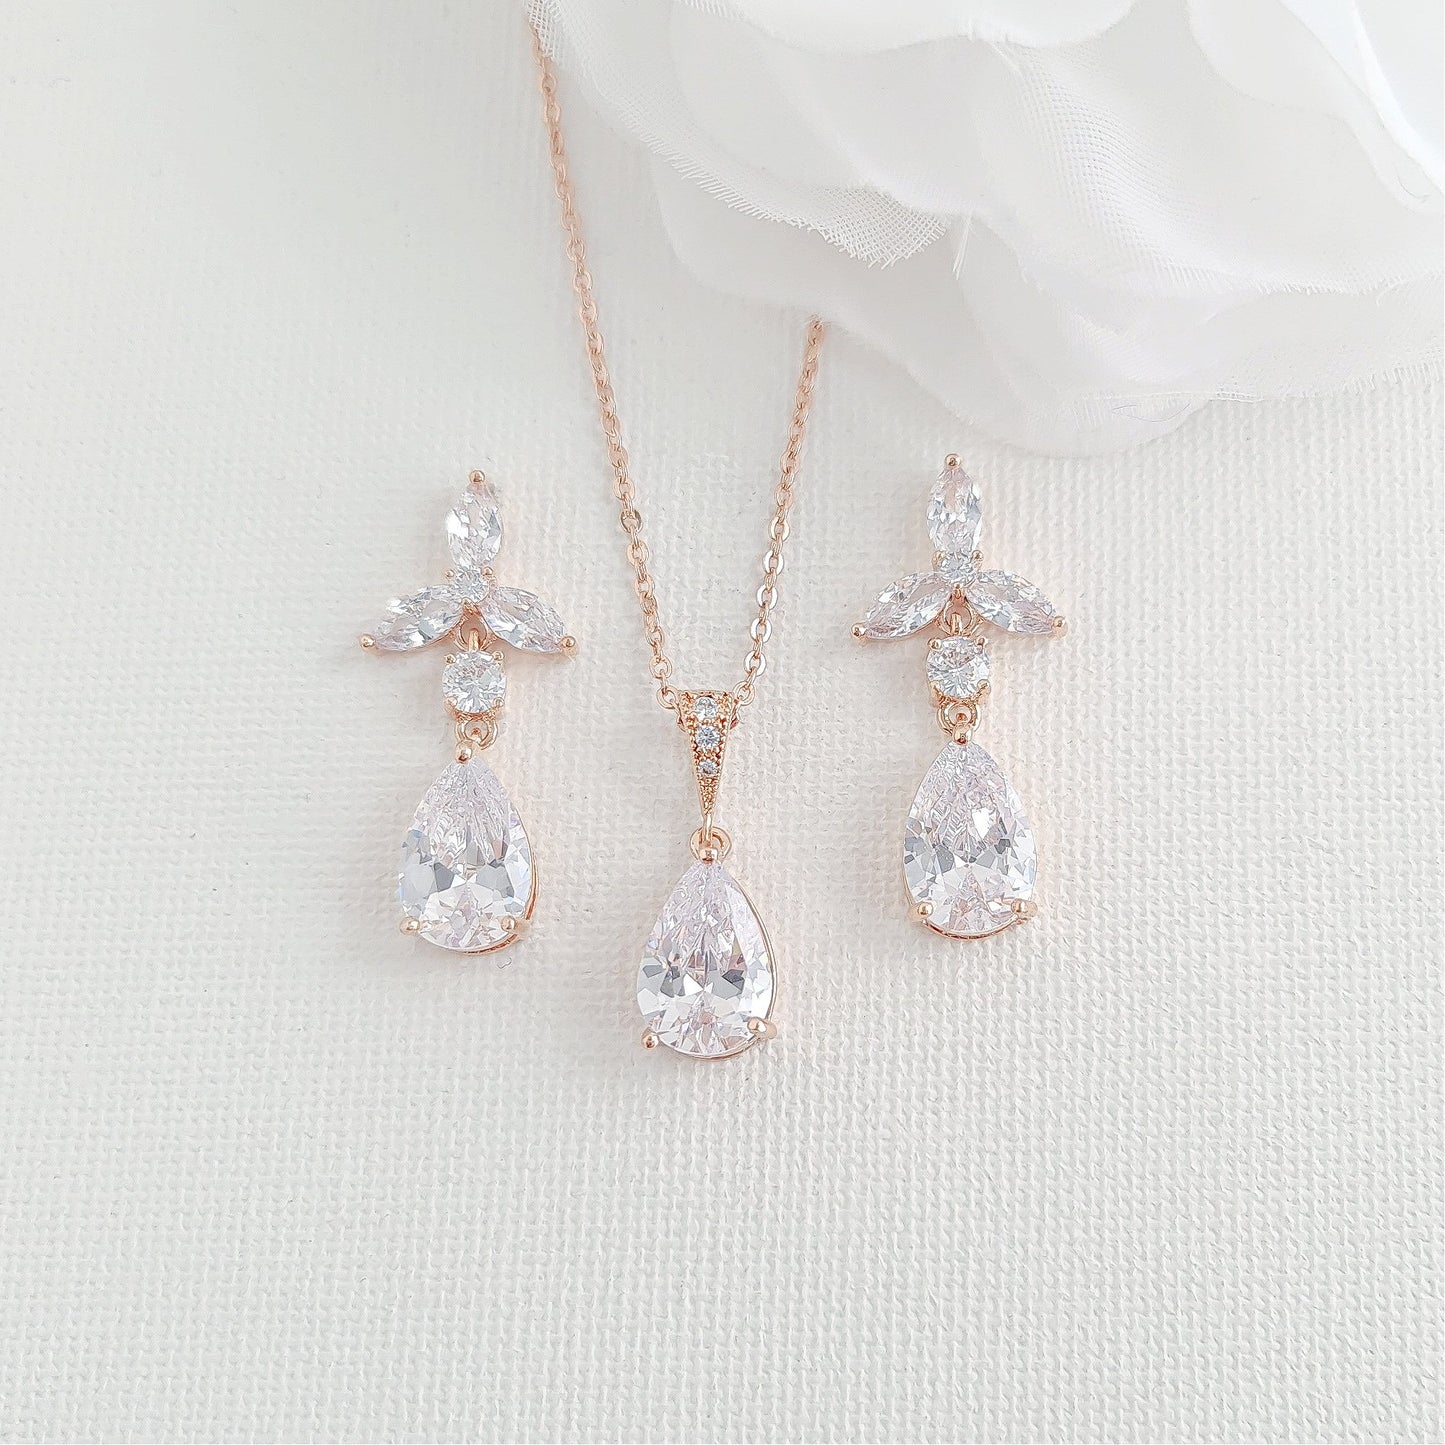 Floral Earrings with Necklace for Bridesmaids Jewelry Gift Set-Flora